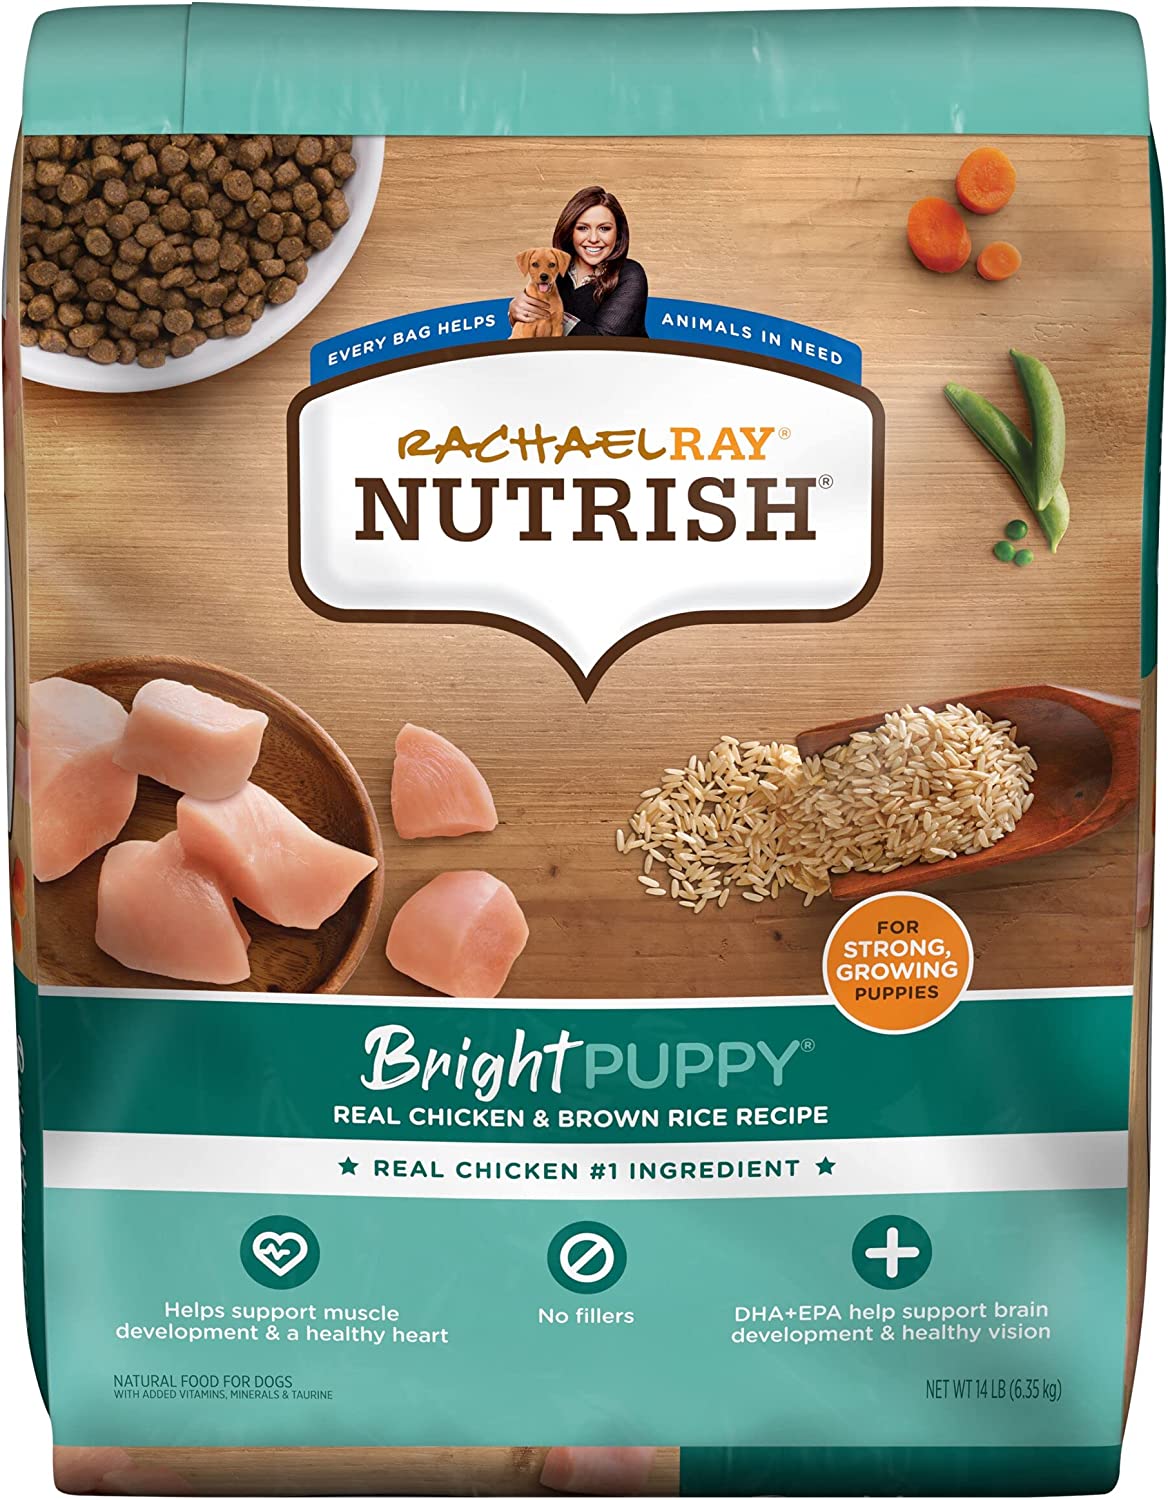 Rachael Ray Nutrish Bright Puppy Premium Natural Dry Dog Food, Real Chicken & Brown Rice Recipe, 14 Pounds (Packaging May Vary)